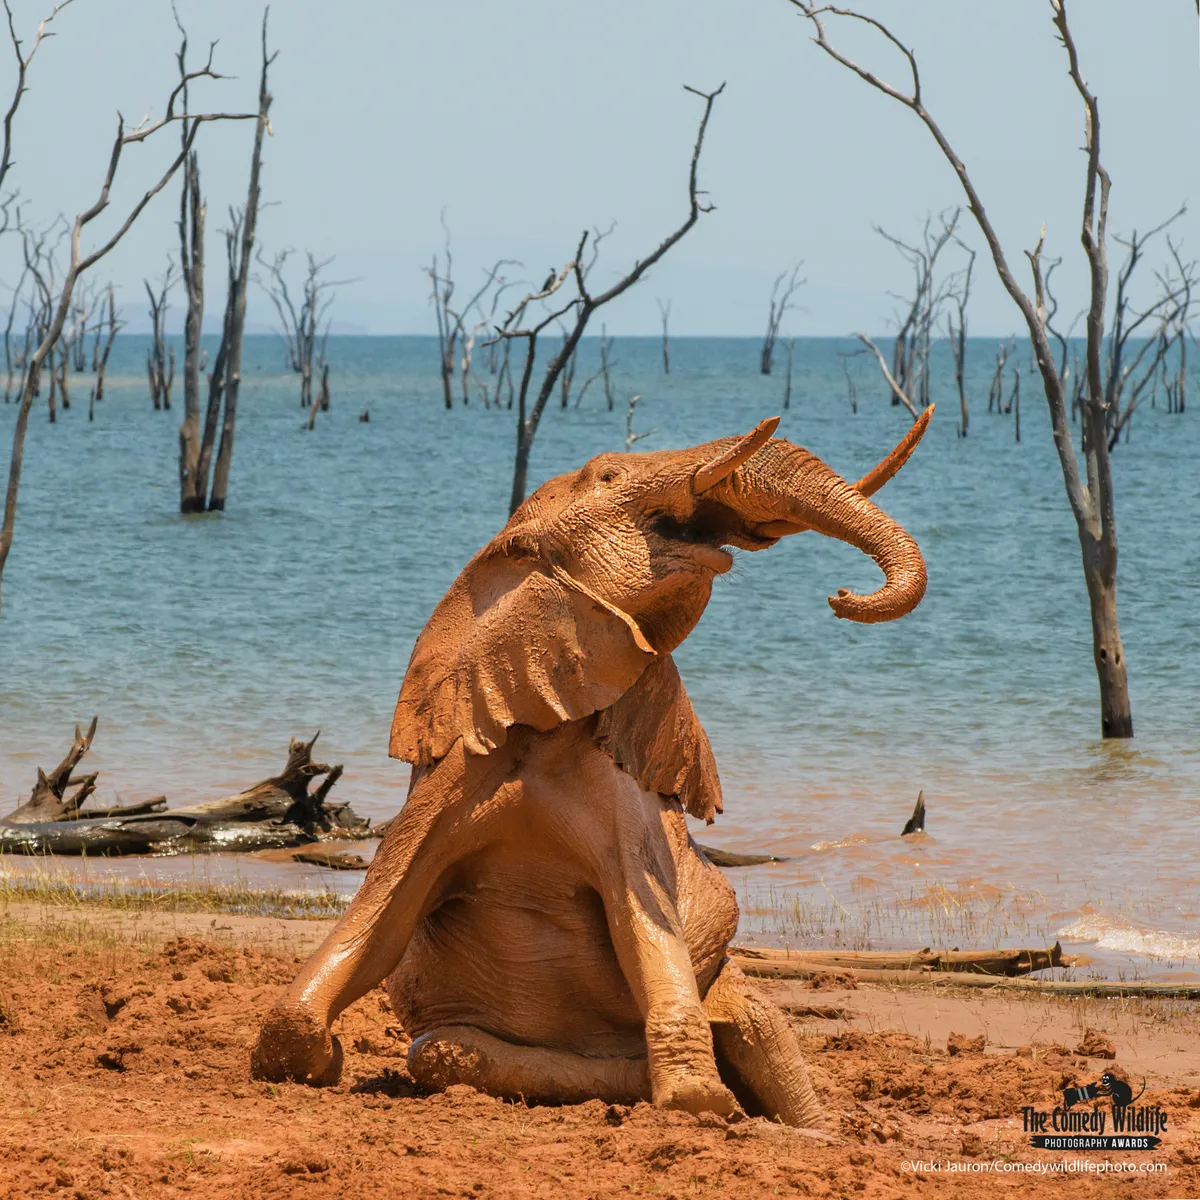 In front of a blue lake (with dead trees sticking up out of it), a young elephant takes a mud bath, sitting with its butt on the ground and head raised up.